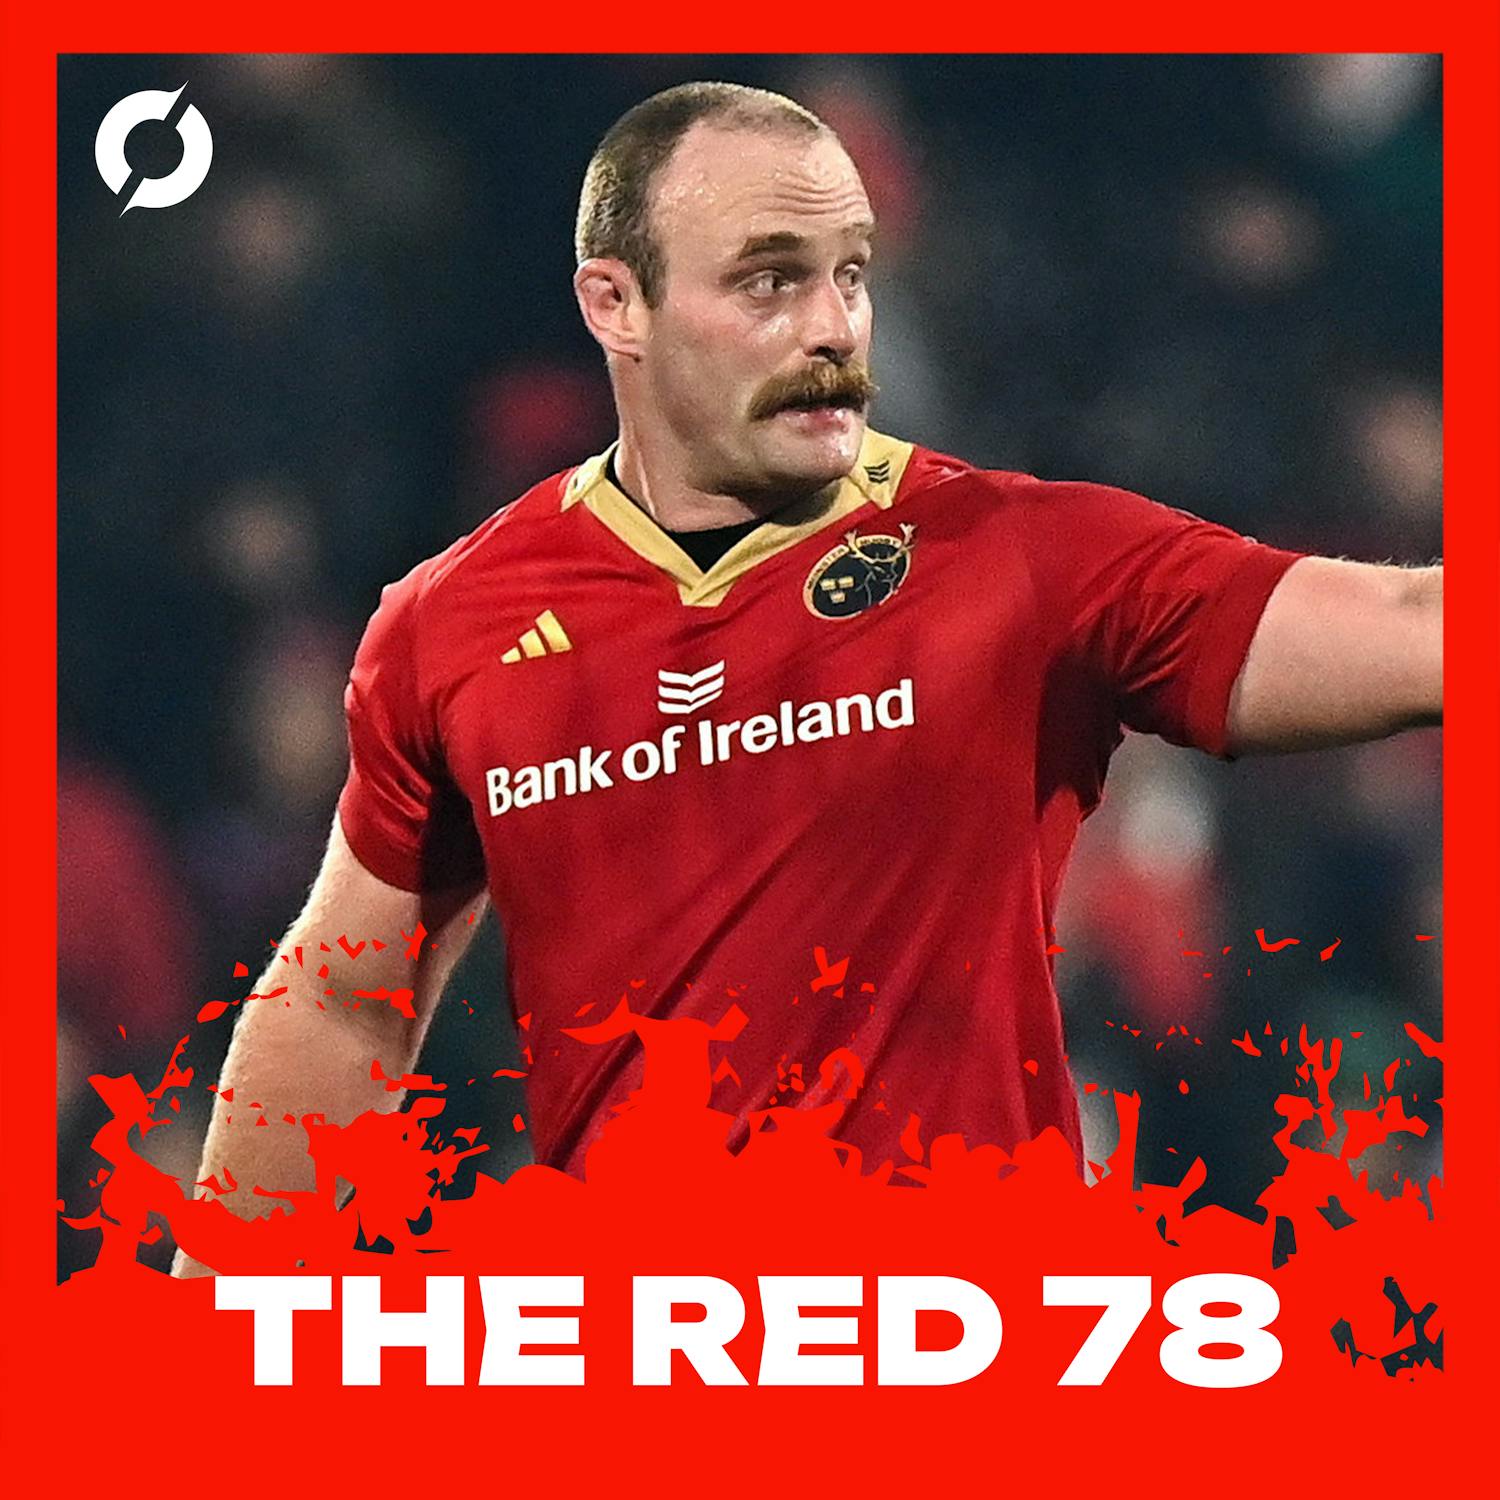 The Red 78 Unlocked: Warriors defeated, Ahern shines, and Bayonne battle ahead in Thomond - Ep. 79